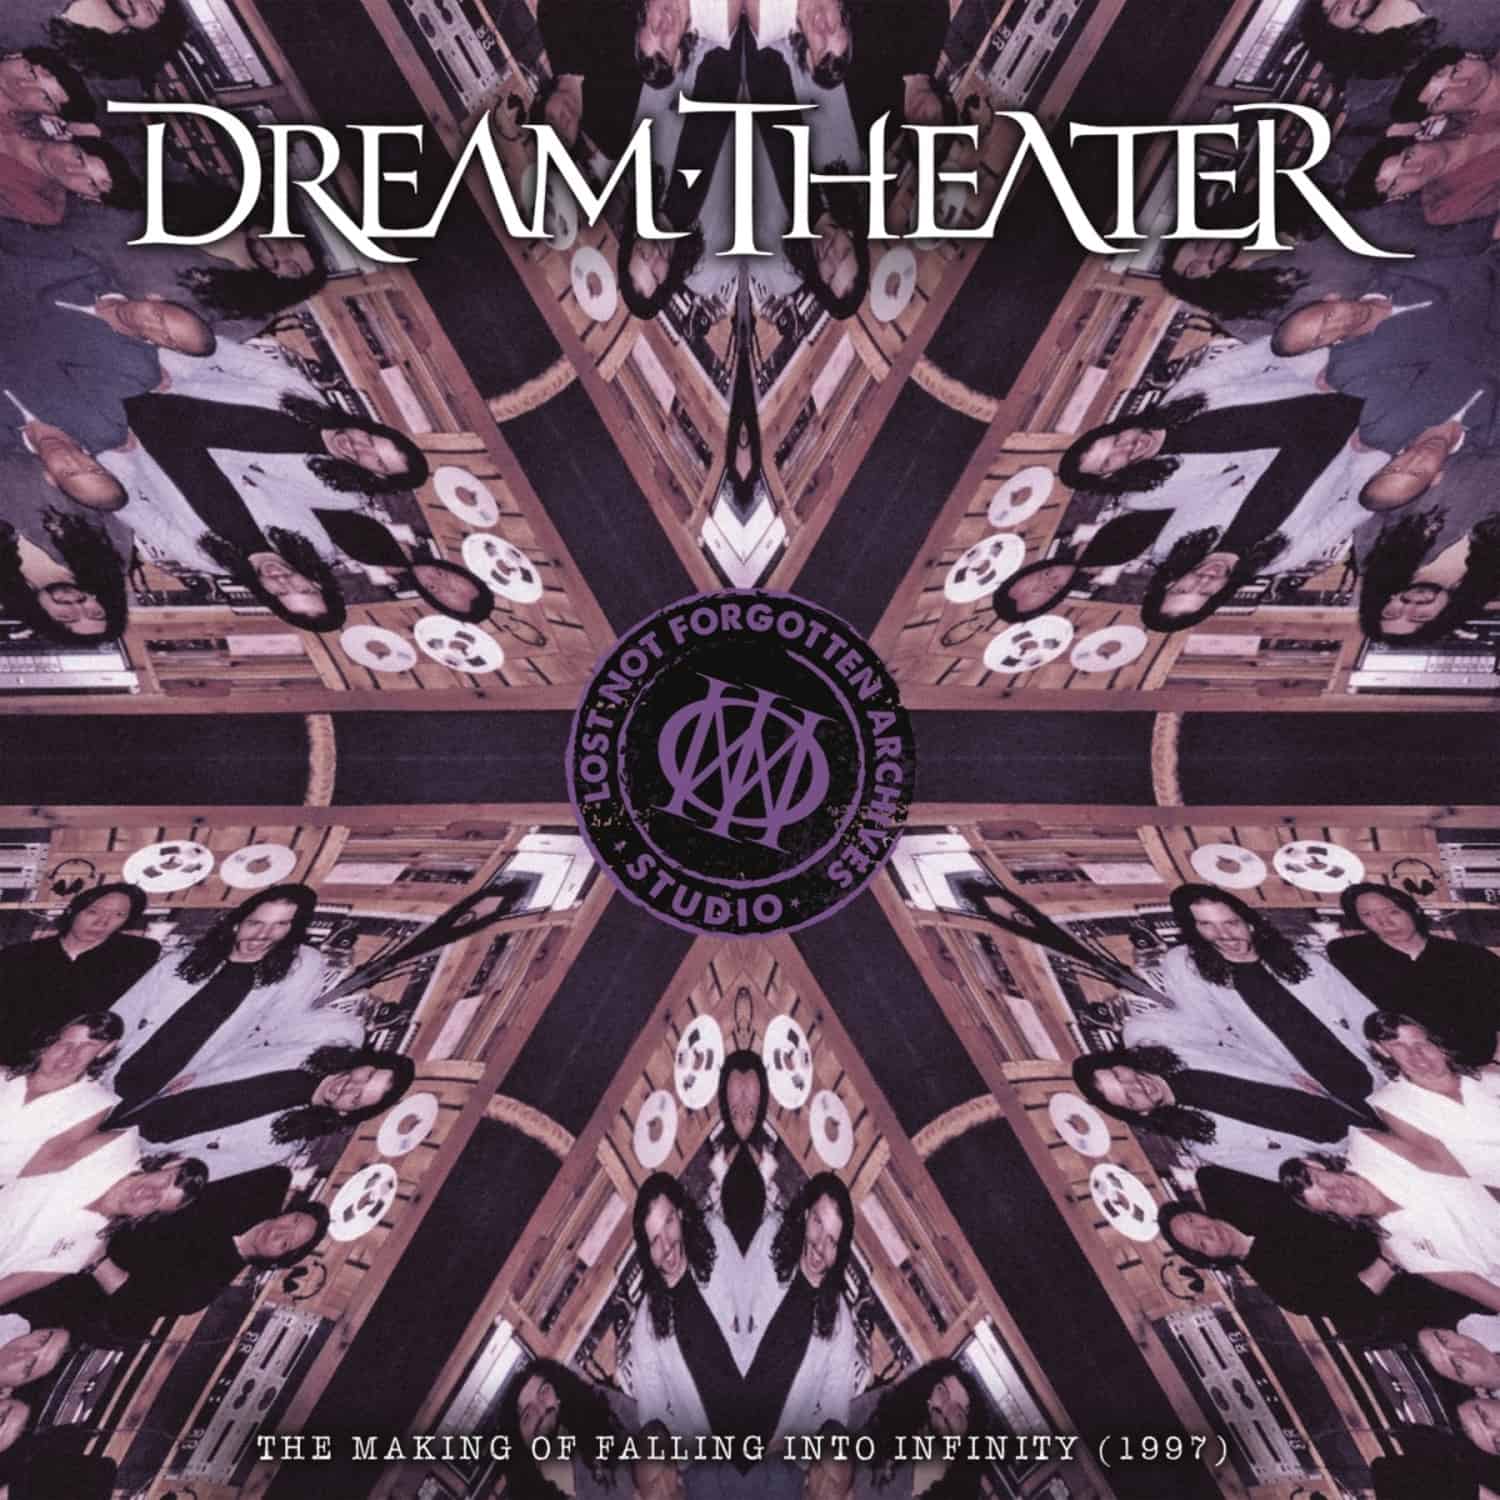 Dream Theater - LOST NOT FORGOTTEN ARCHIVES: THE MAKING OF FALLING